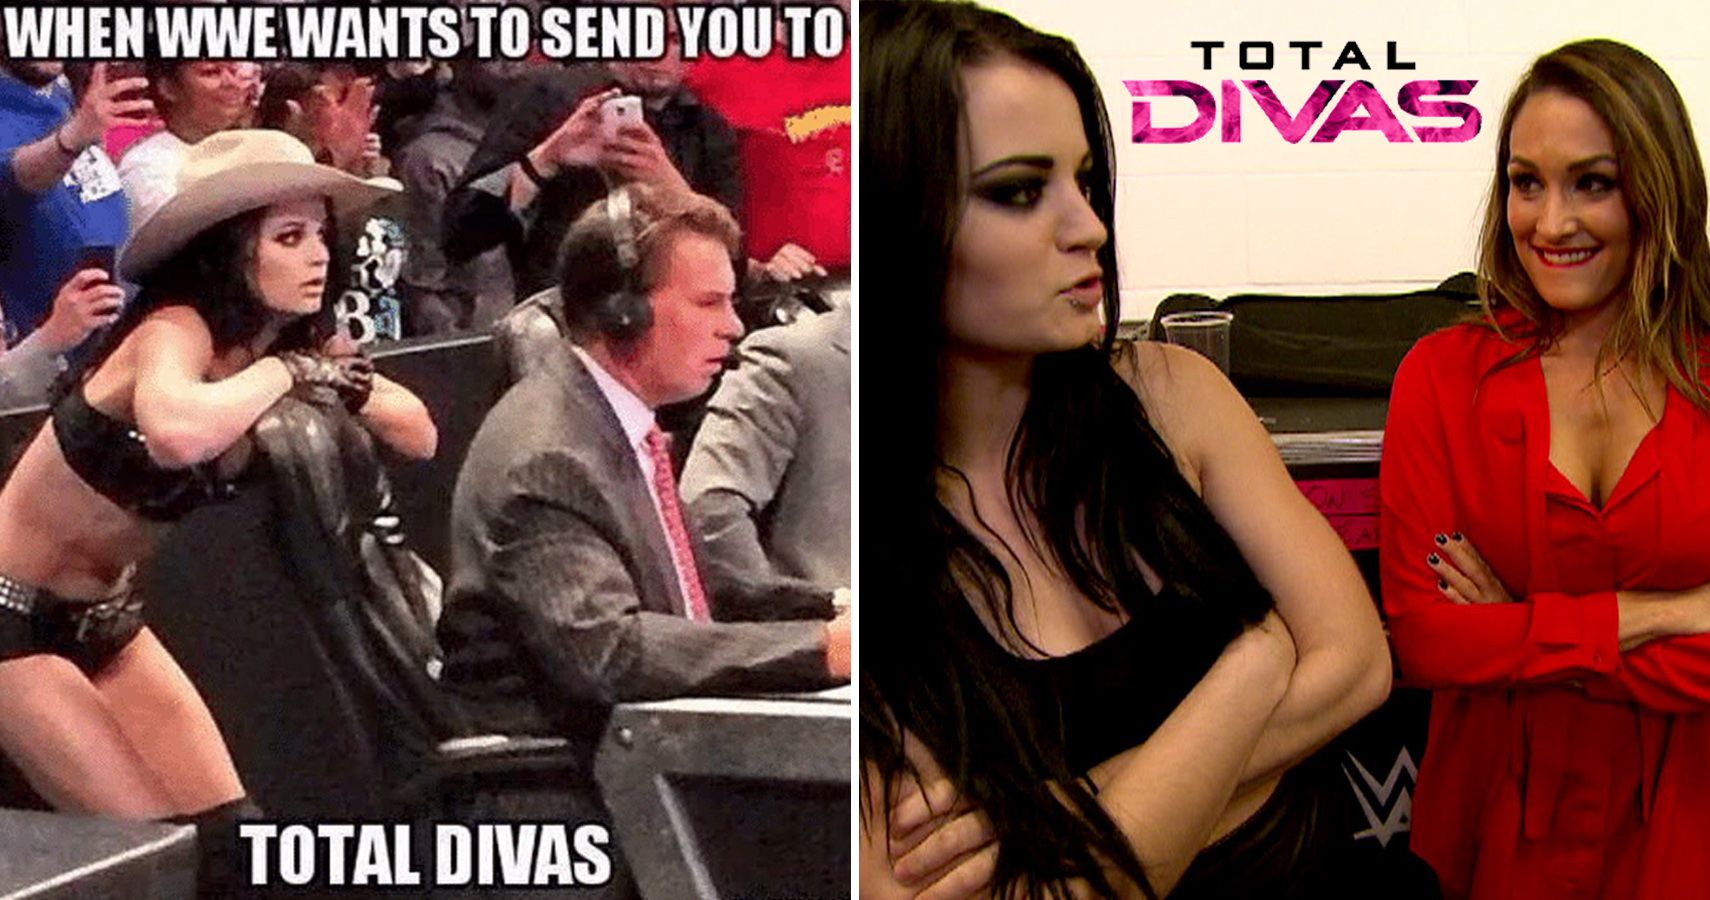 Wwe Diva Paige Porn - 25 Savage AF Memes About The Women Of WWE